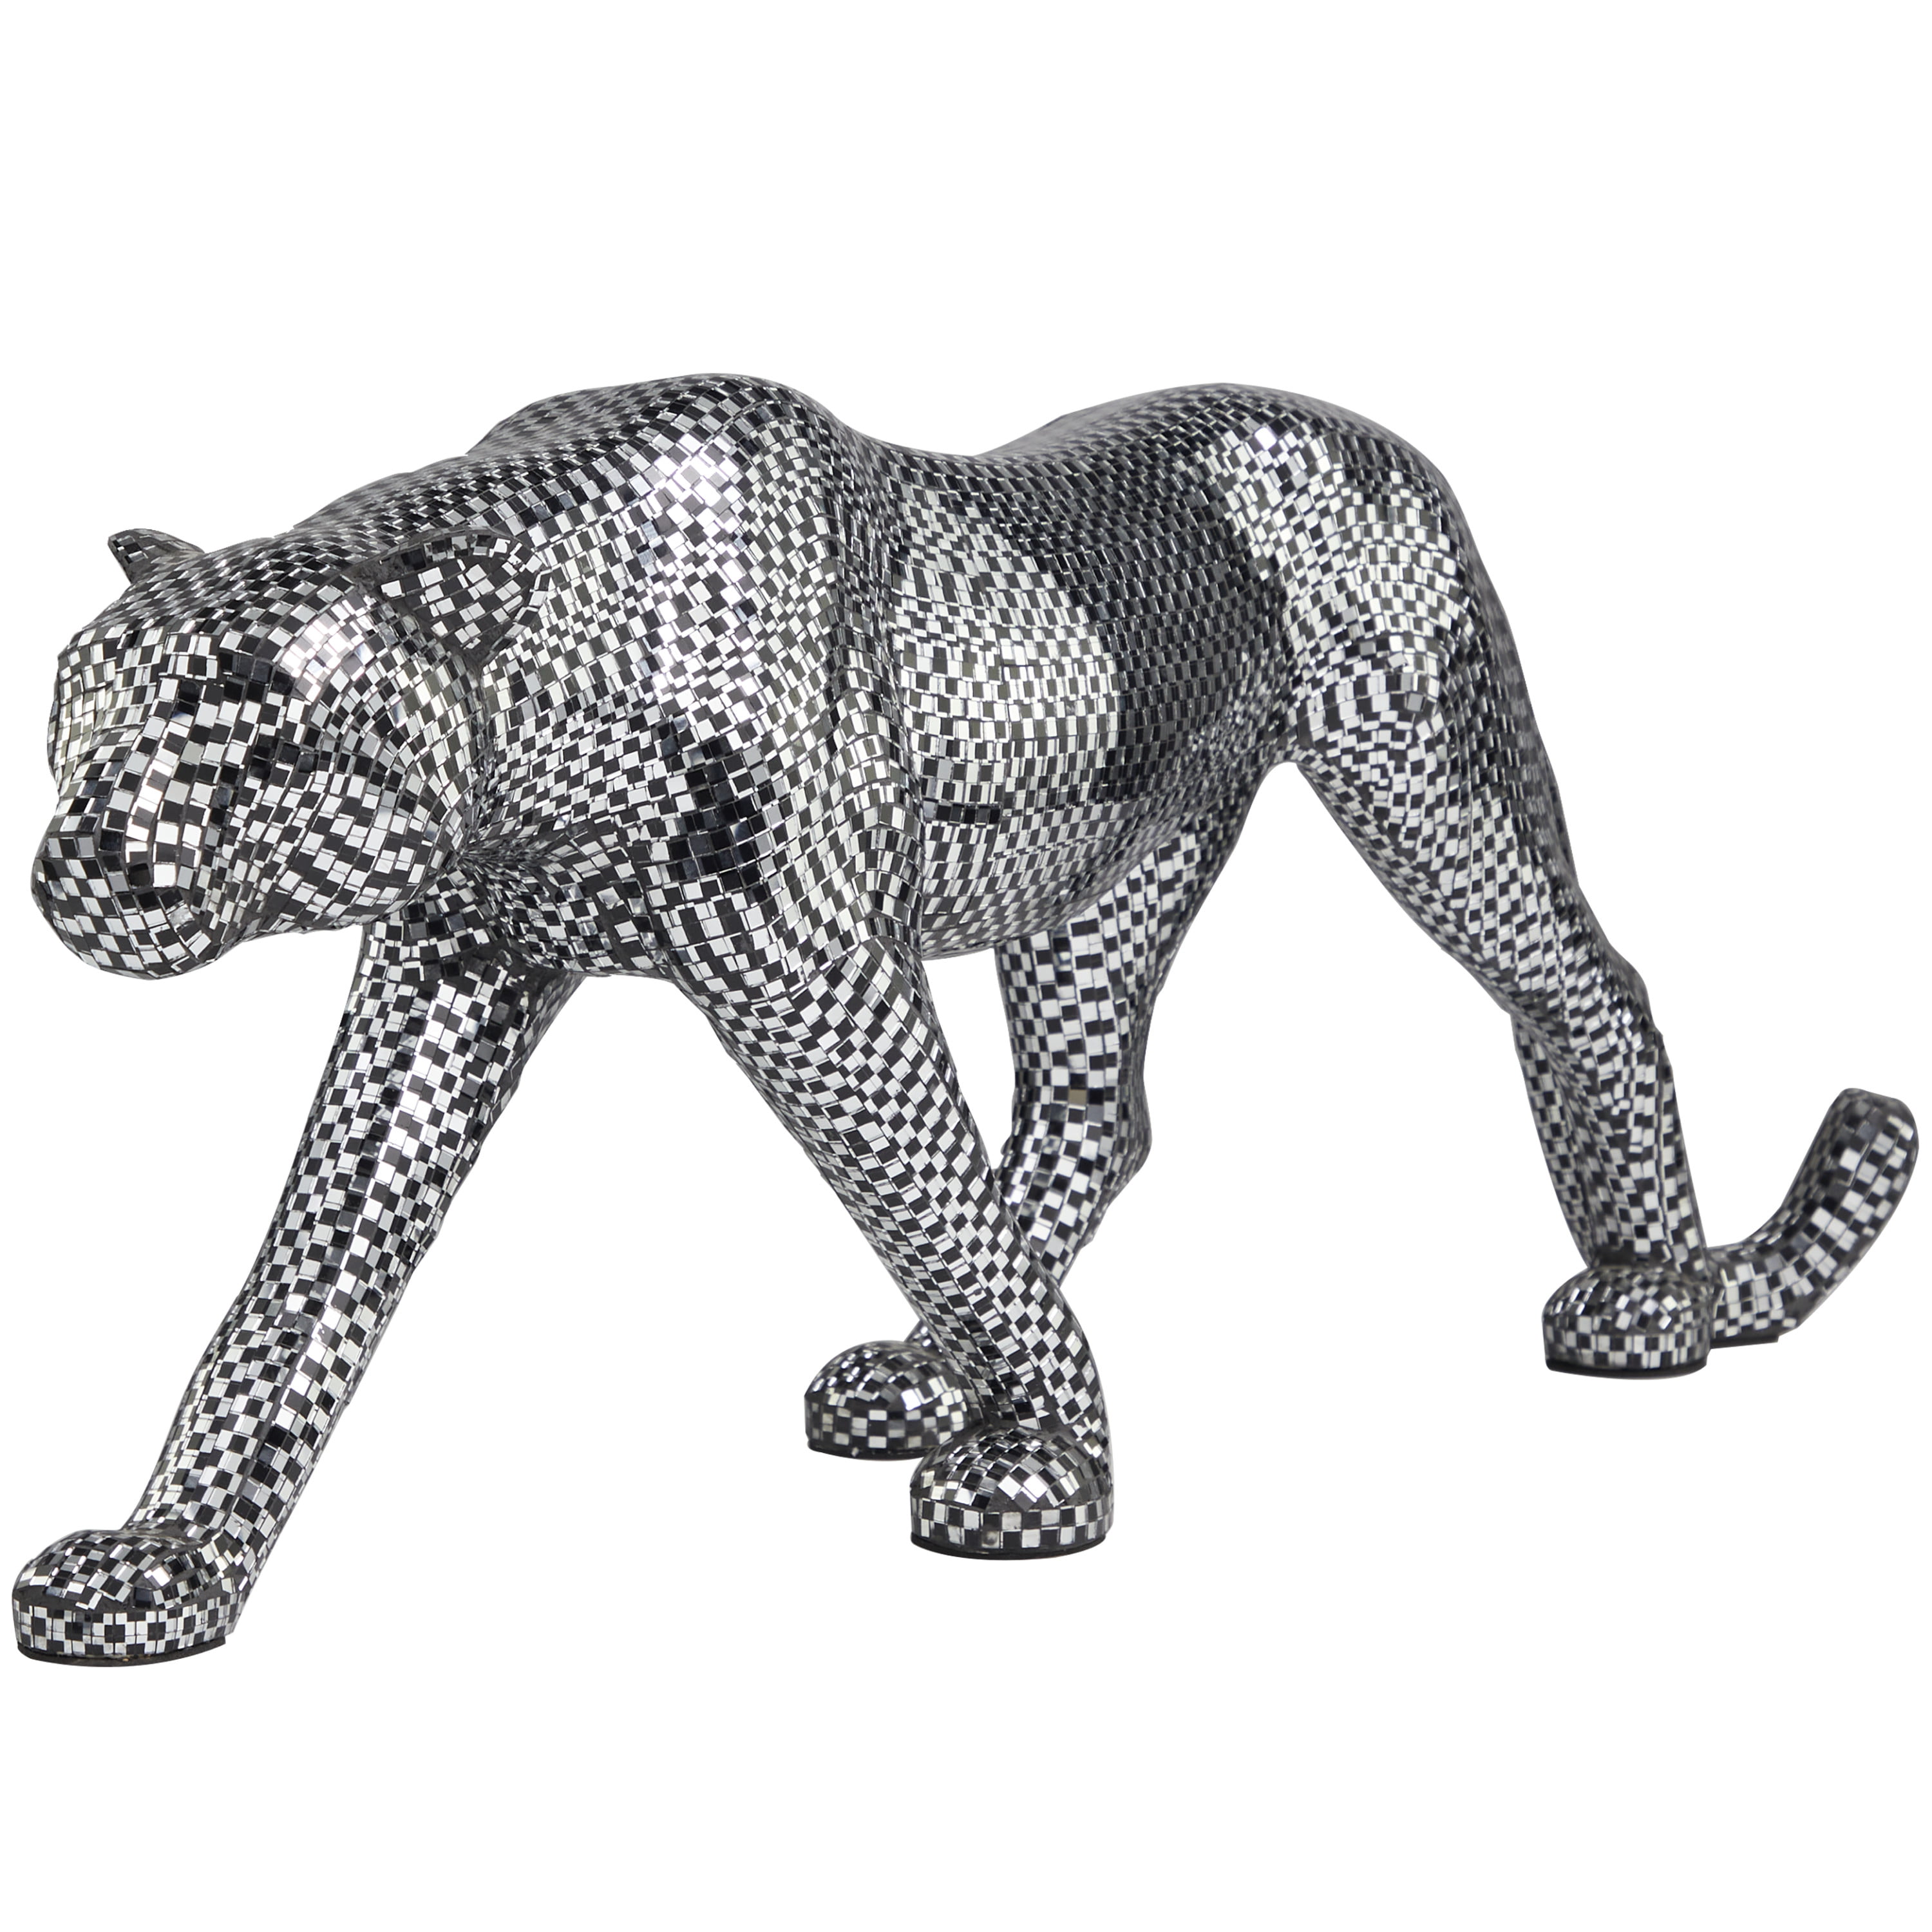 31 x 13 Black Resin Mirrored Leopard Sculpture with Checkered